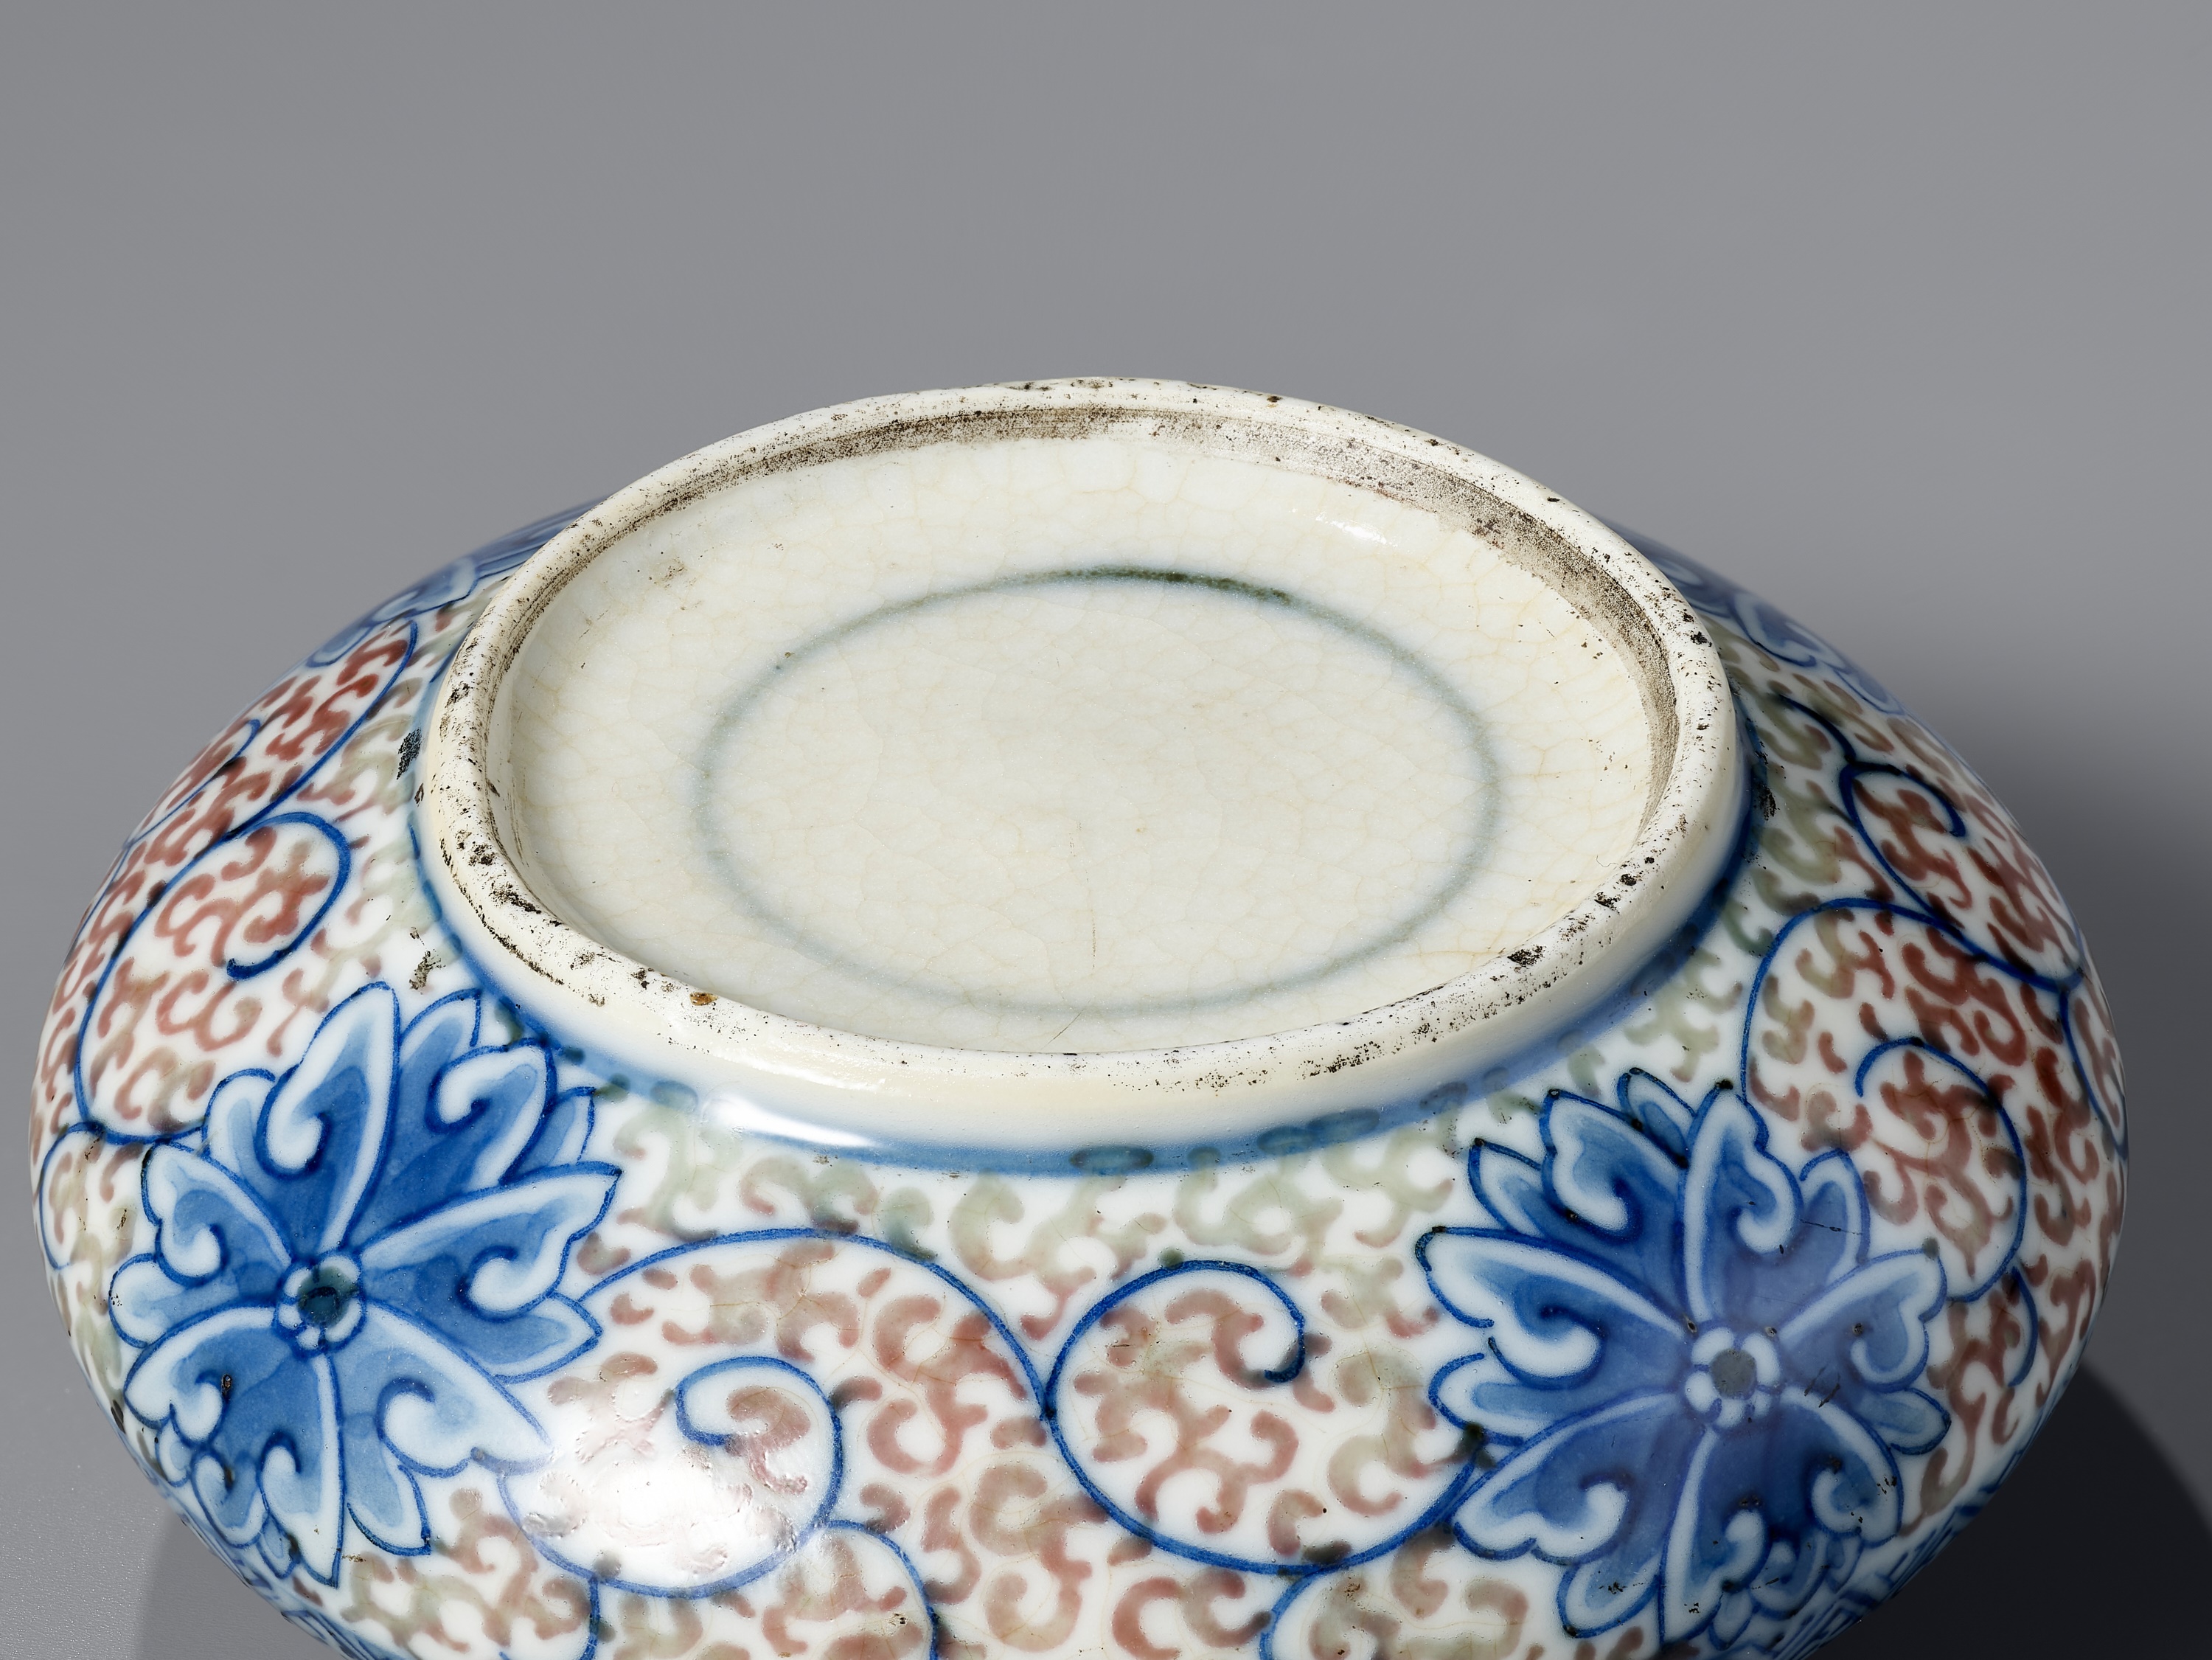 A PORCELAIN WATER POT, WITH MATCHING BRONZE SPOON AND WOOD STAND, QING DYNASTY - Image 9 of 14